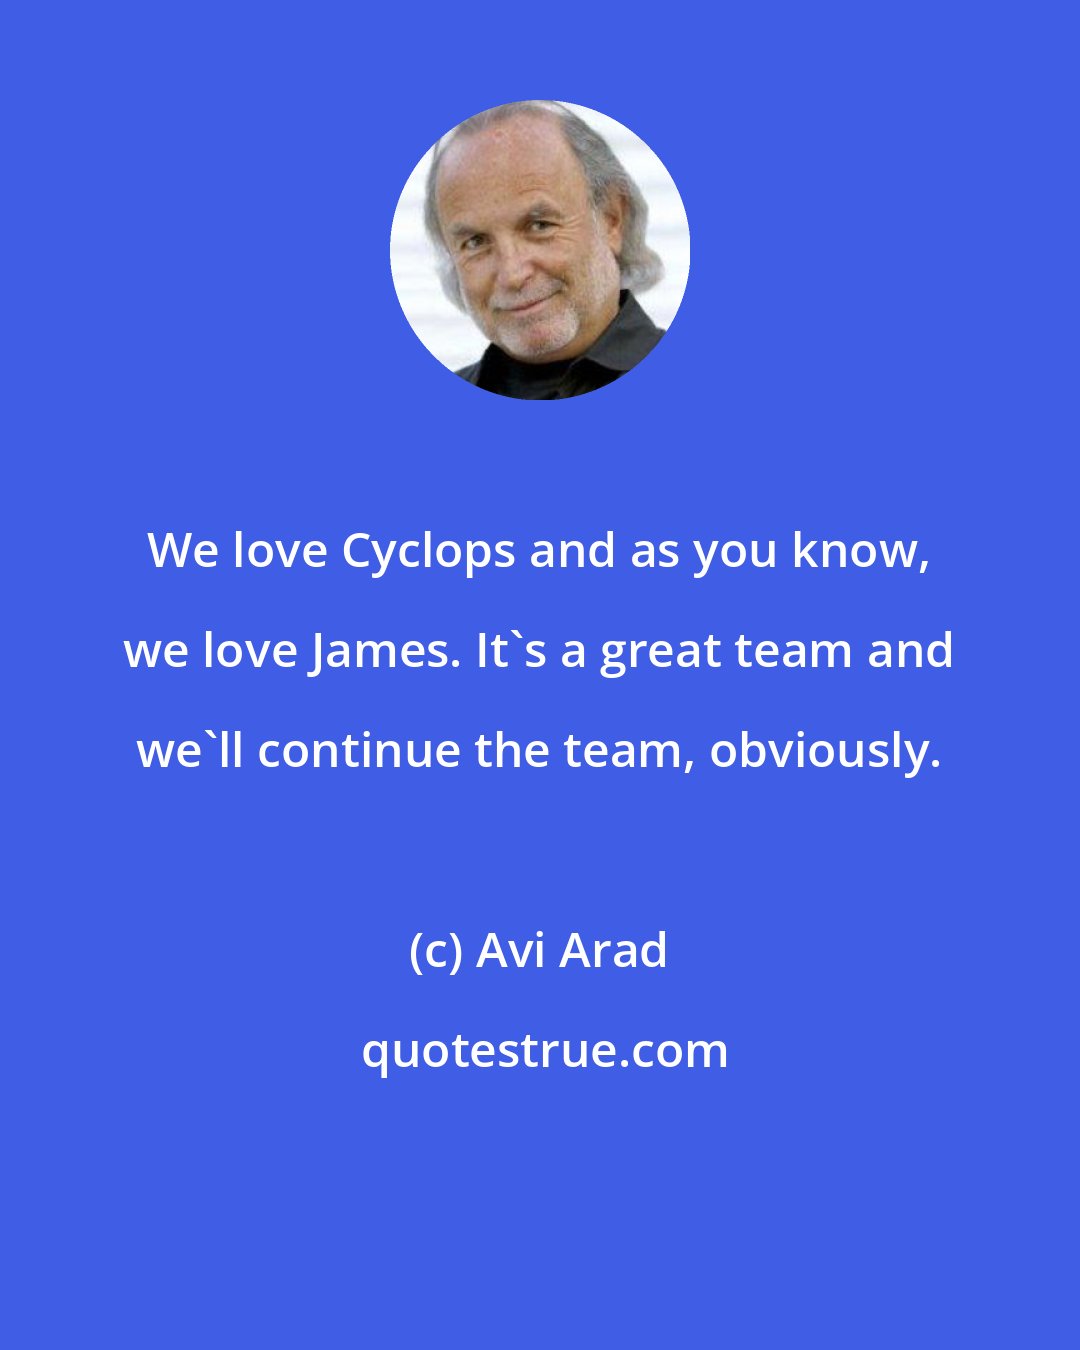 Avi Arad: We love Cyclops and as you know, we love James. It's a great team and we'll continue the team, obviously.